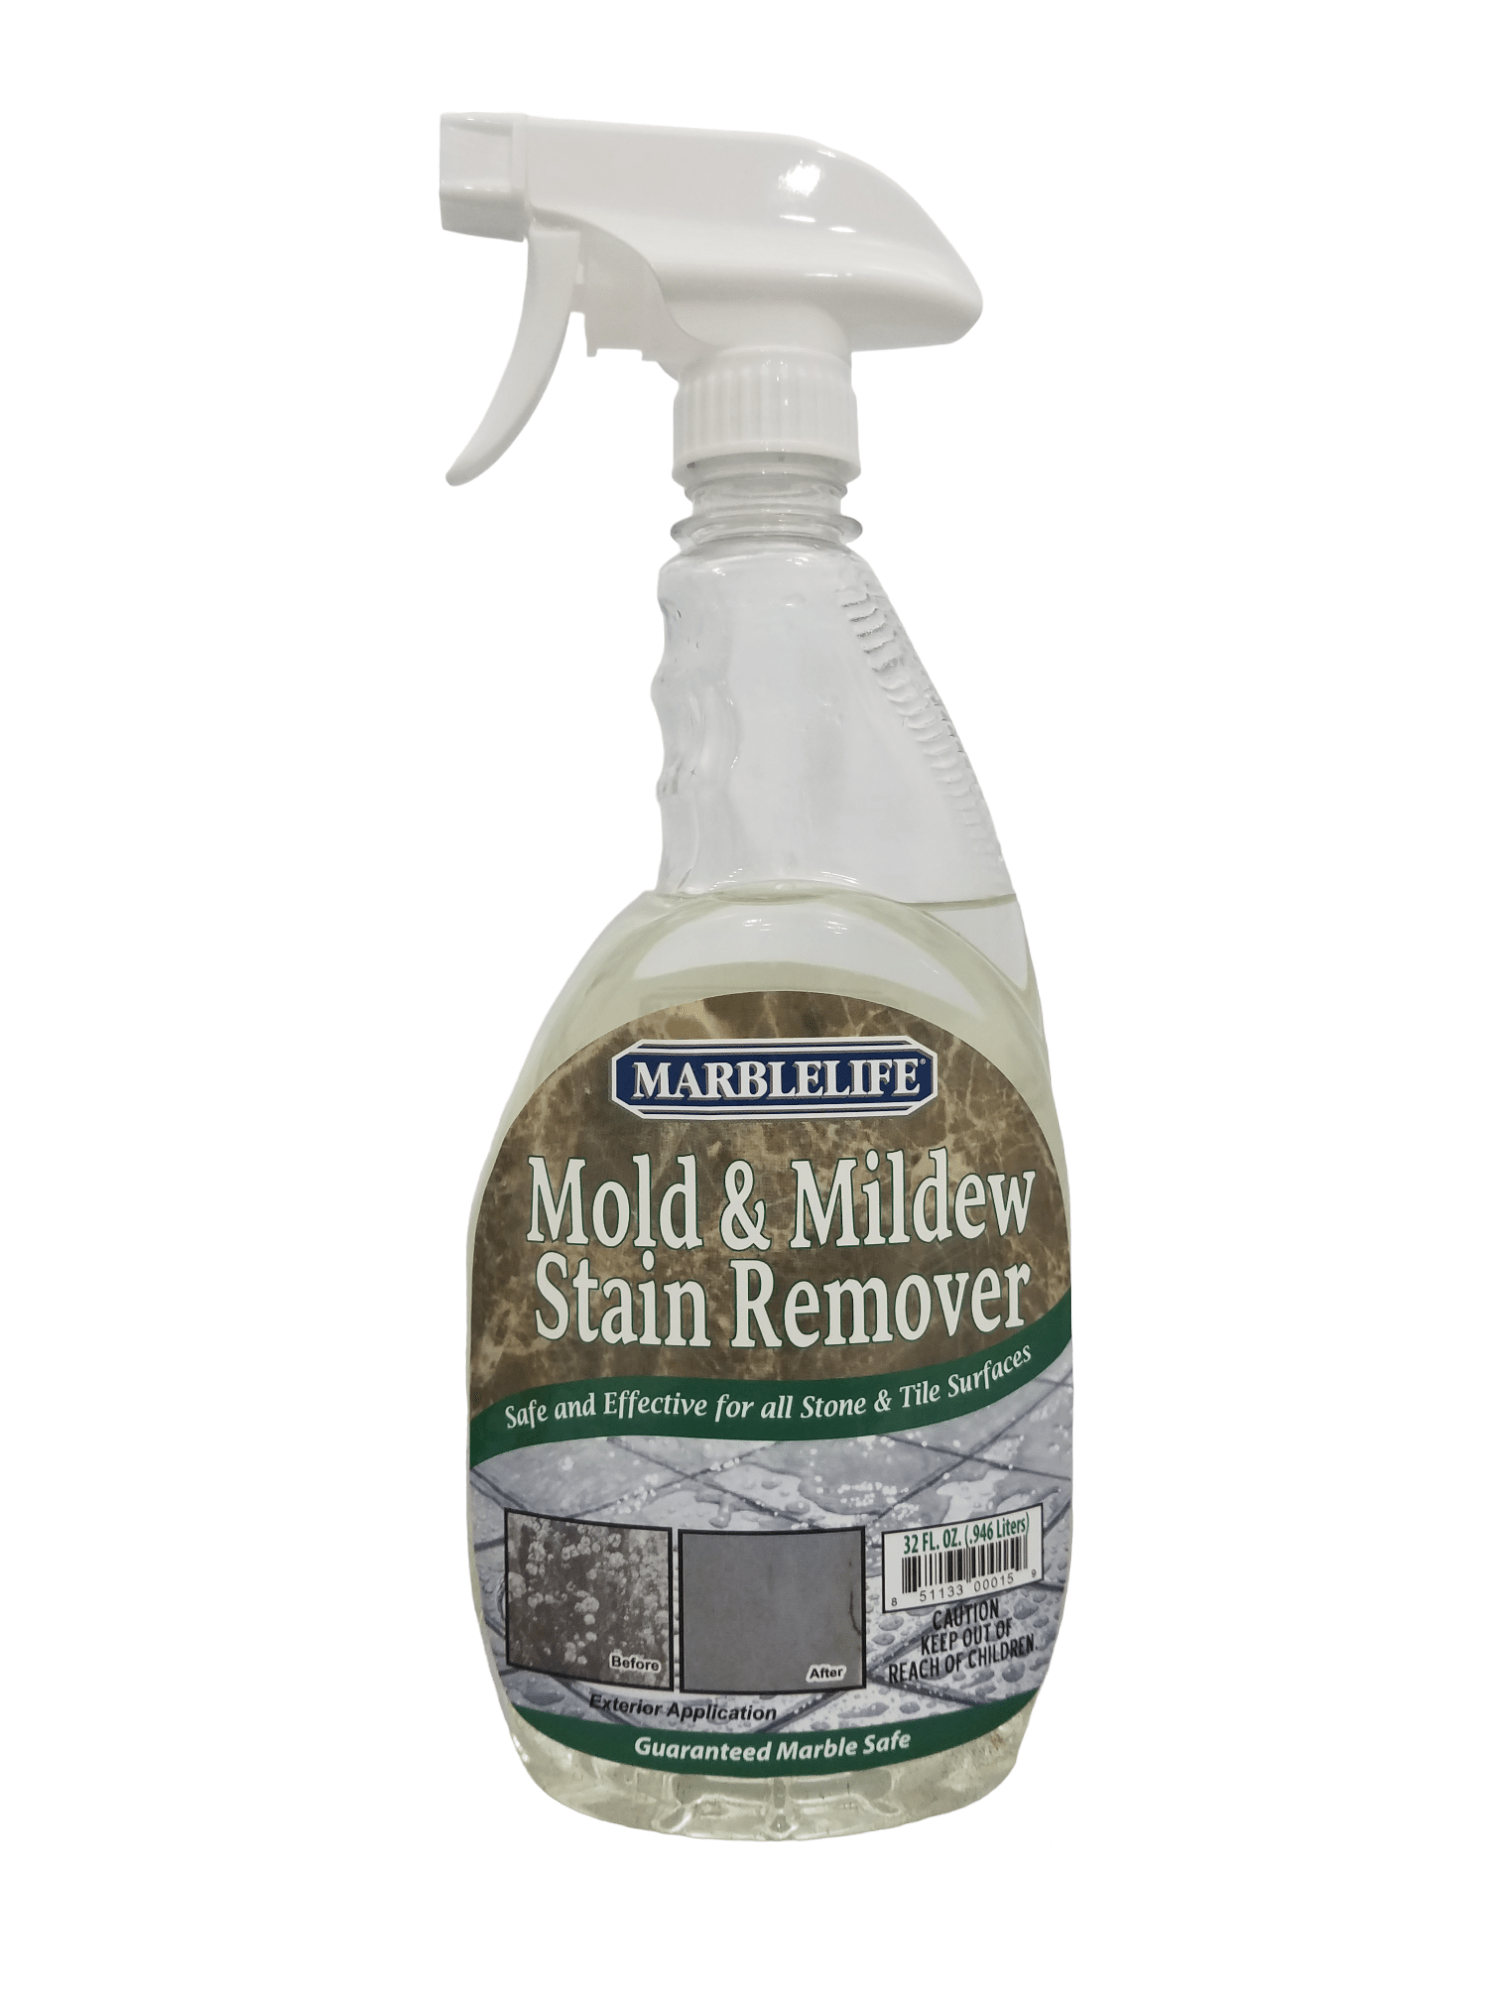 MARBLELIFE® Mold & Mildew Stain Remover Cleaner